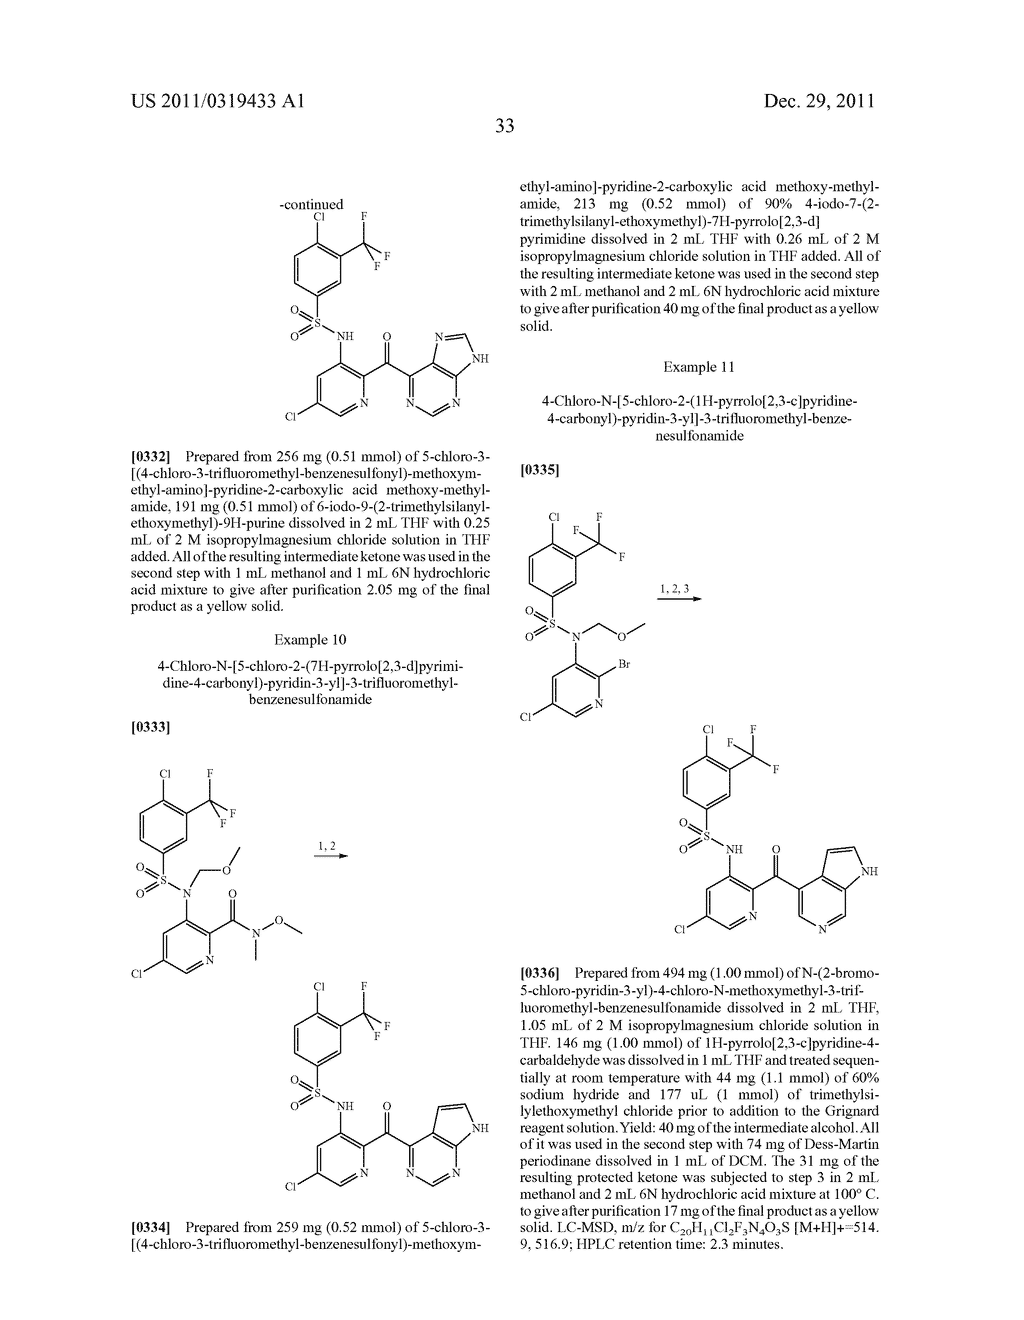 FUSED HETEROARYL PYRIDYL AND PHENYL BENZENESUFLONAMIDES AS CCR2 MODULATORS     FOR THE TREATMENT OF INFLAMMATION - diagram, schematic, and image 35